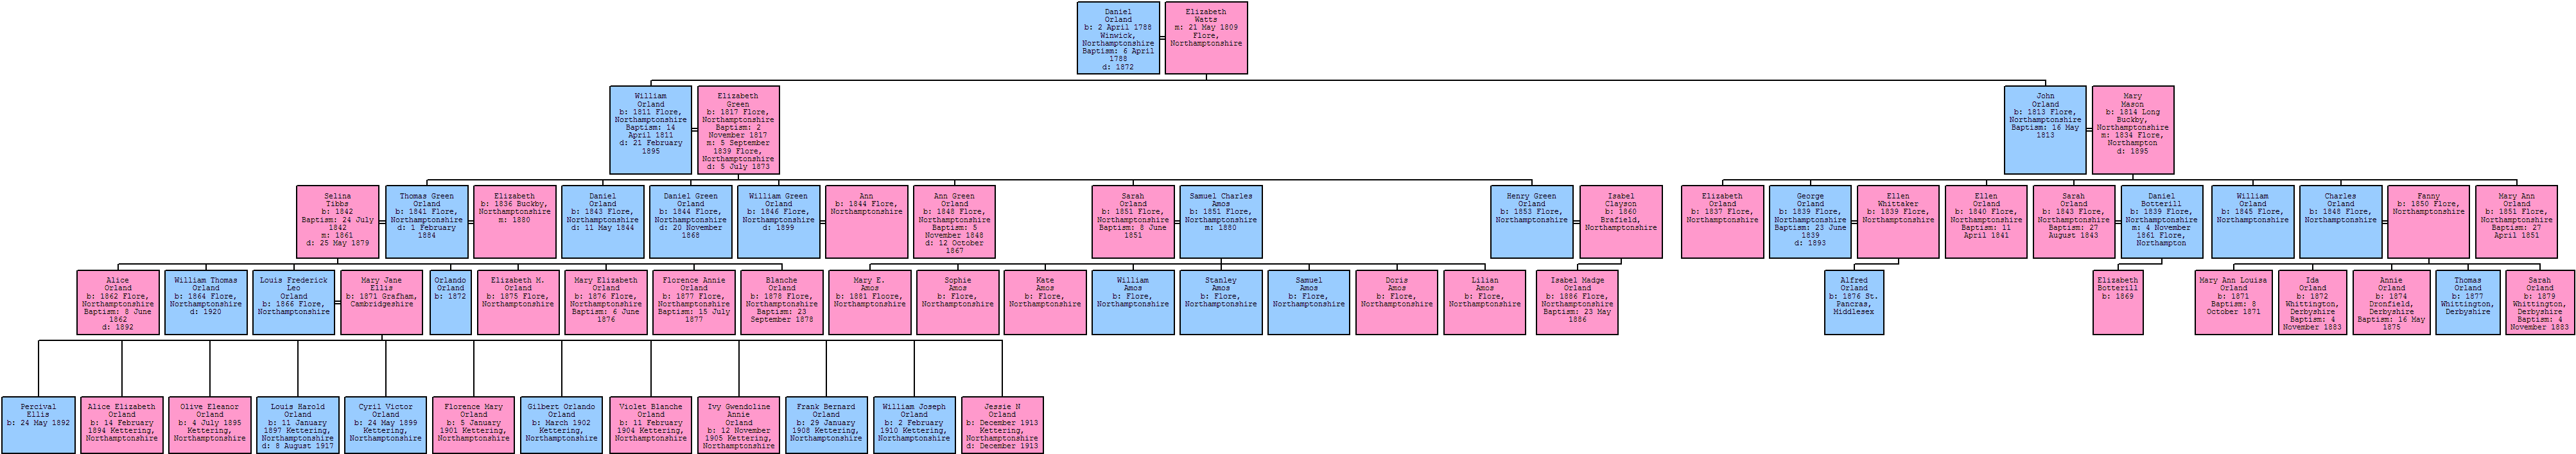 Family Tree of the Orland family from Flore